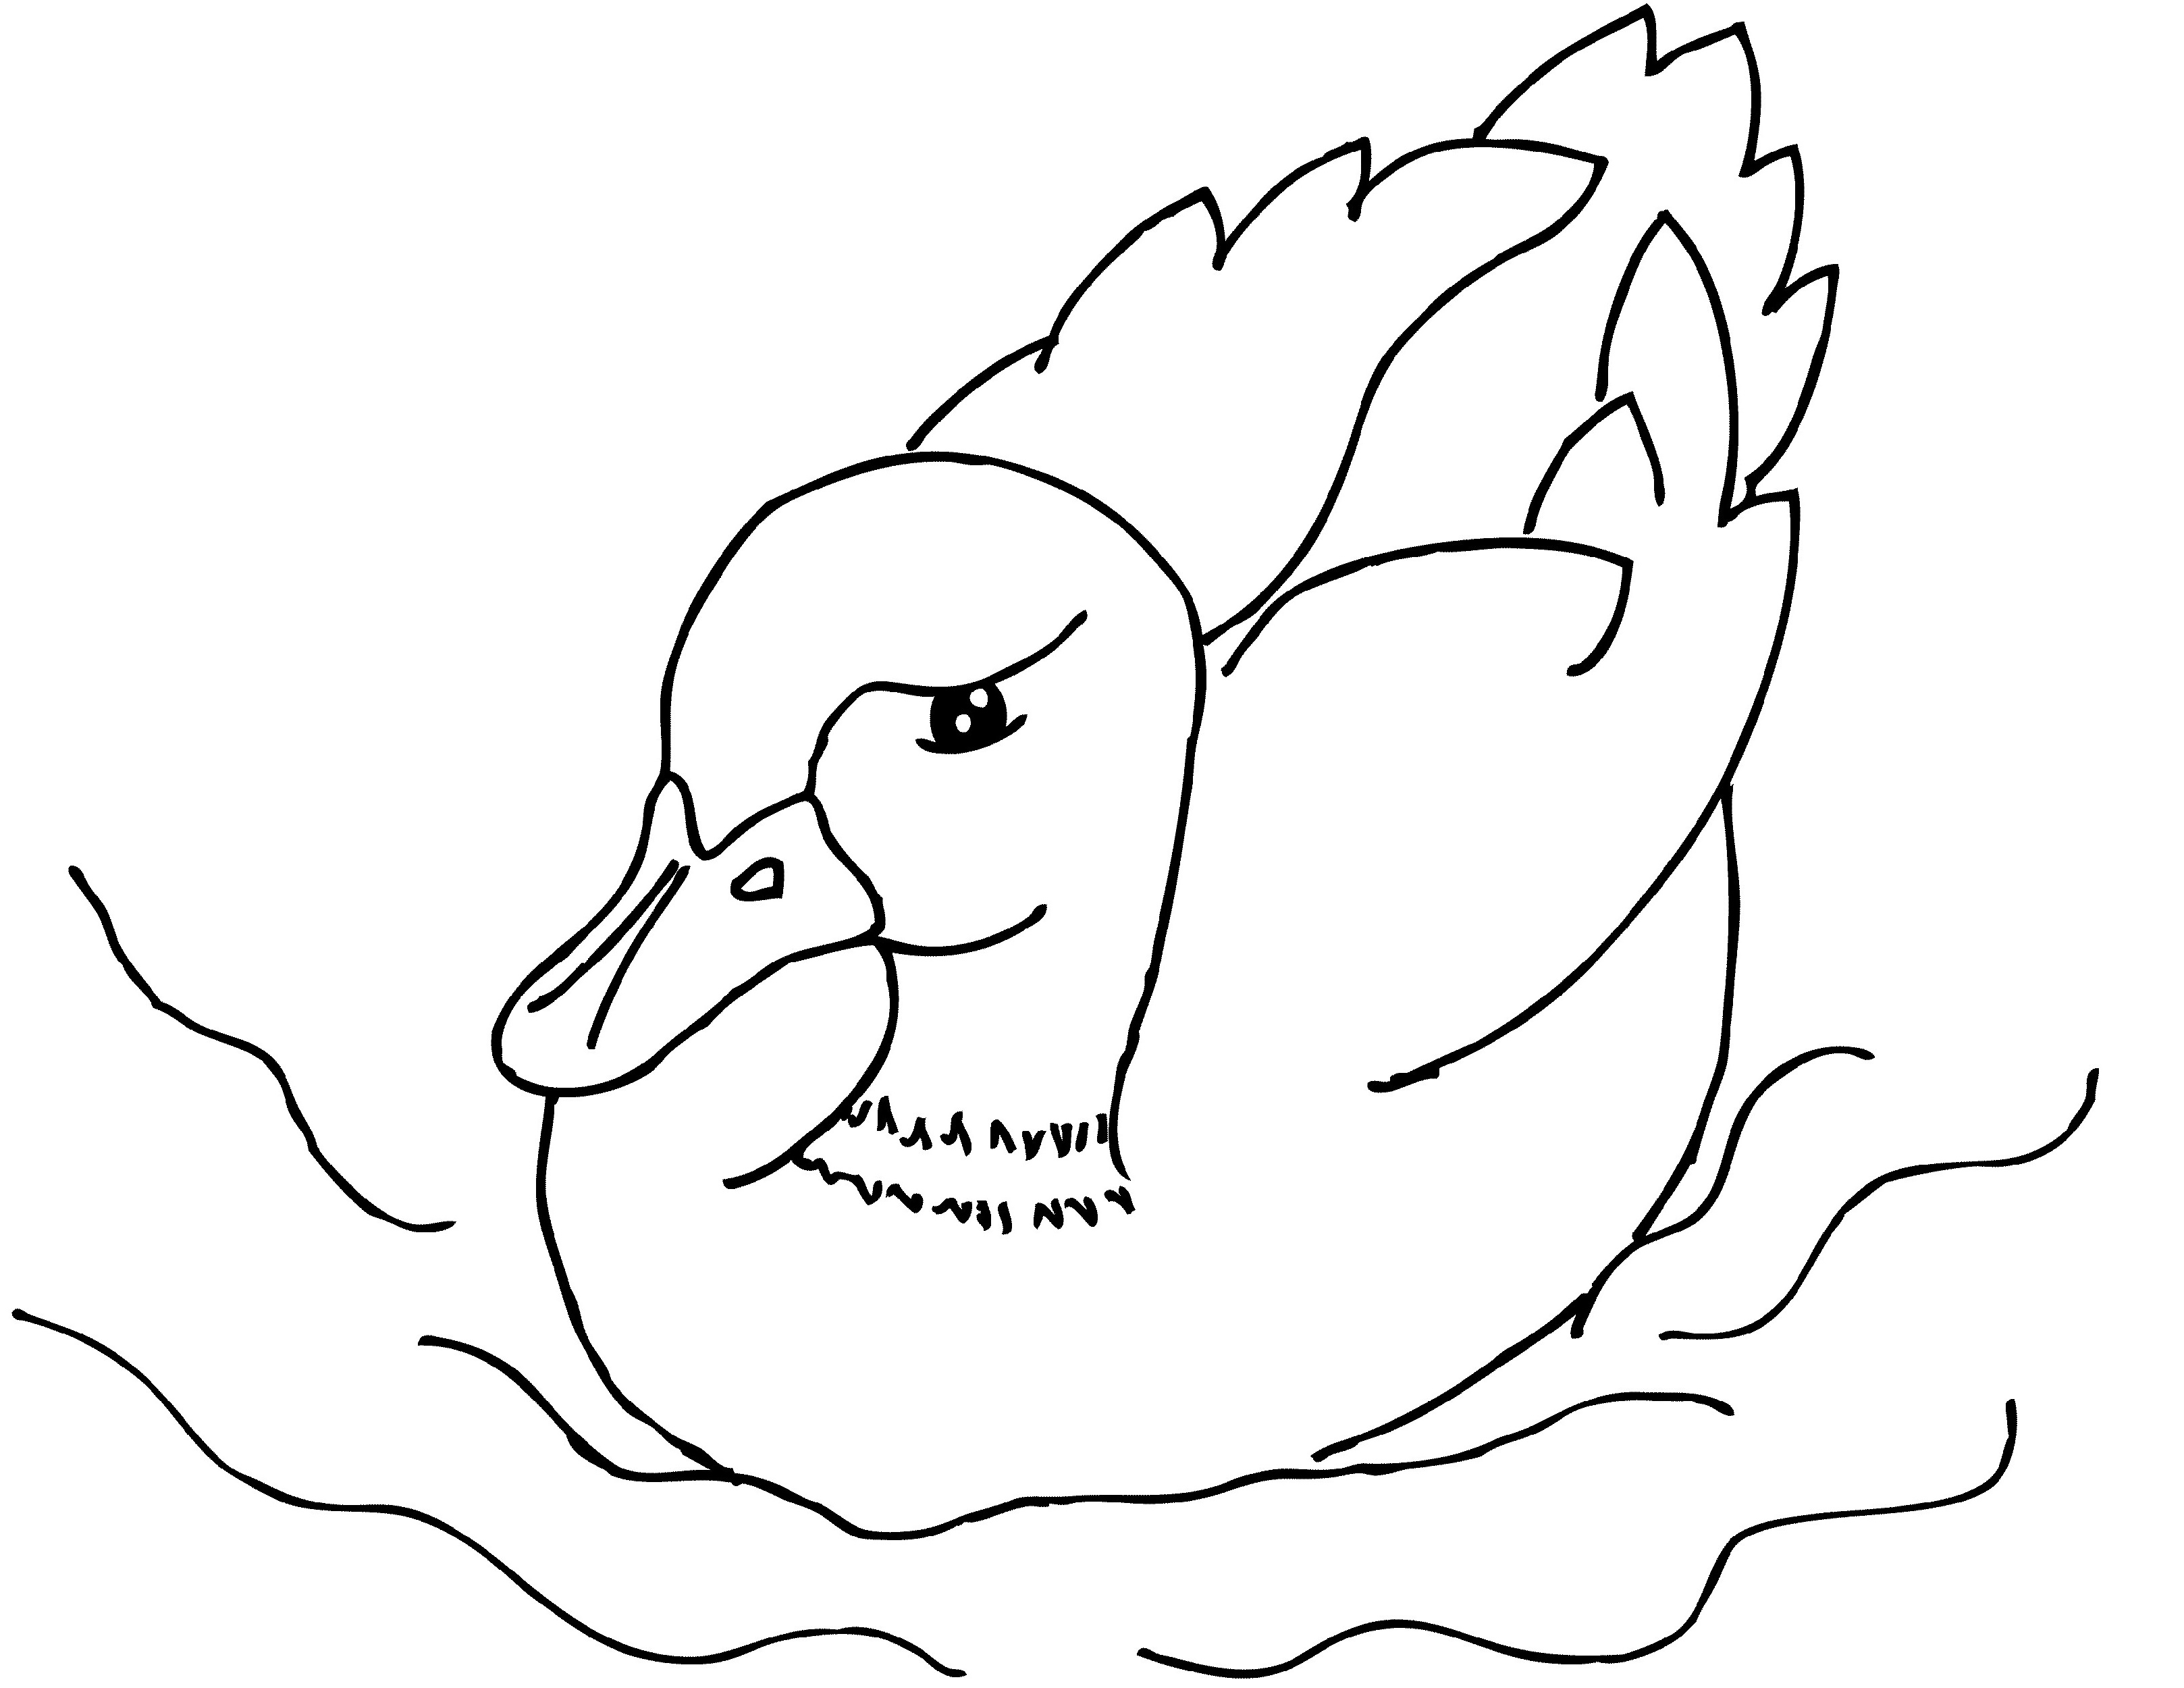 Rubber Duck Coloring Pages for All Ages K5 Worksheets